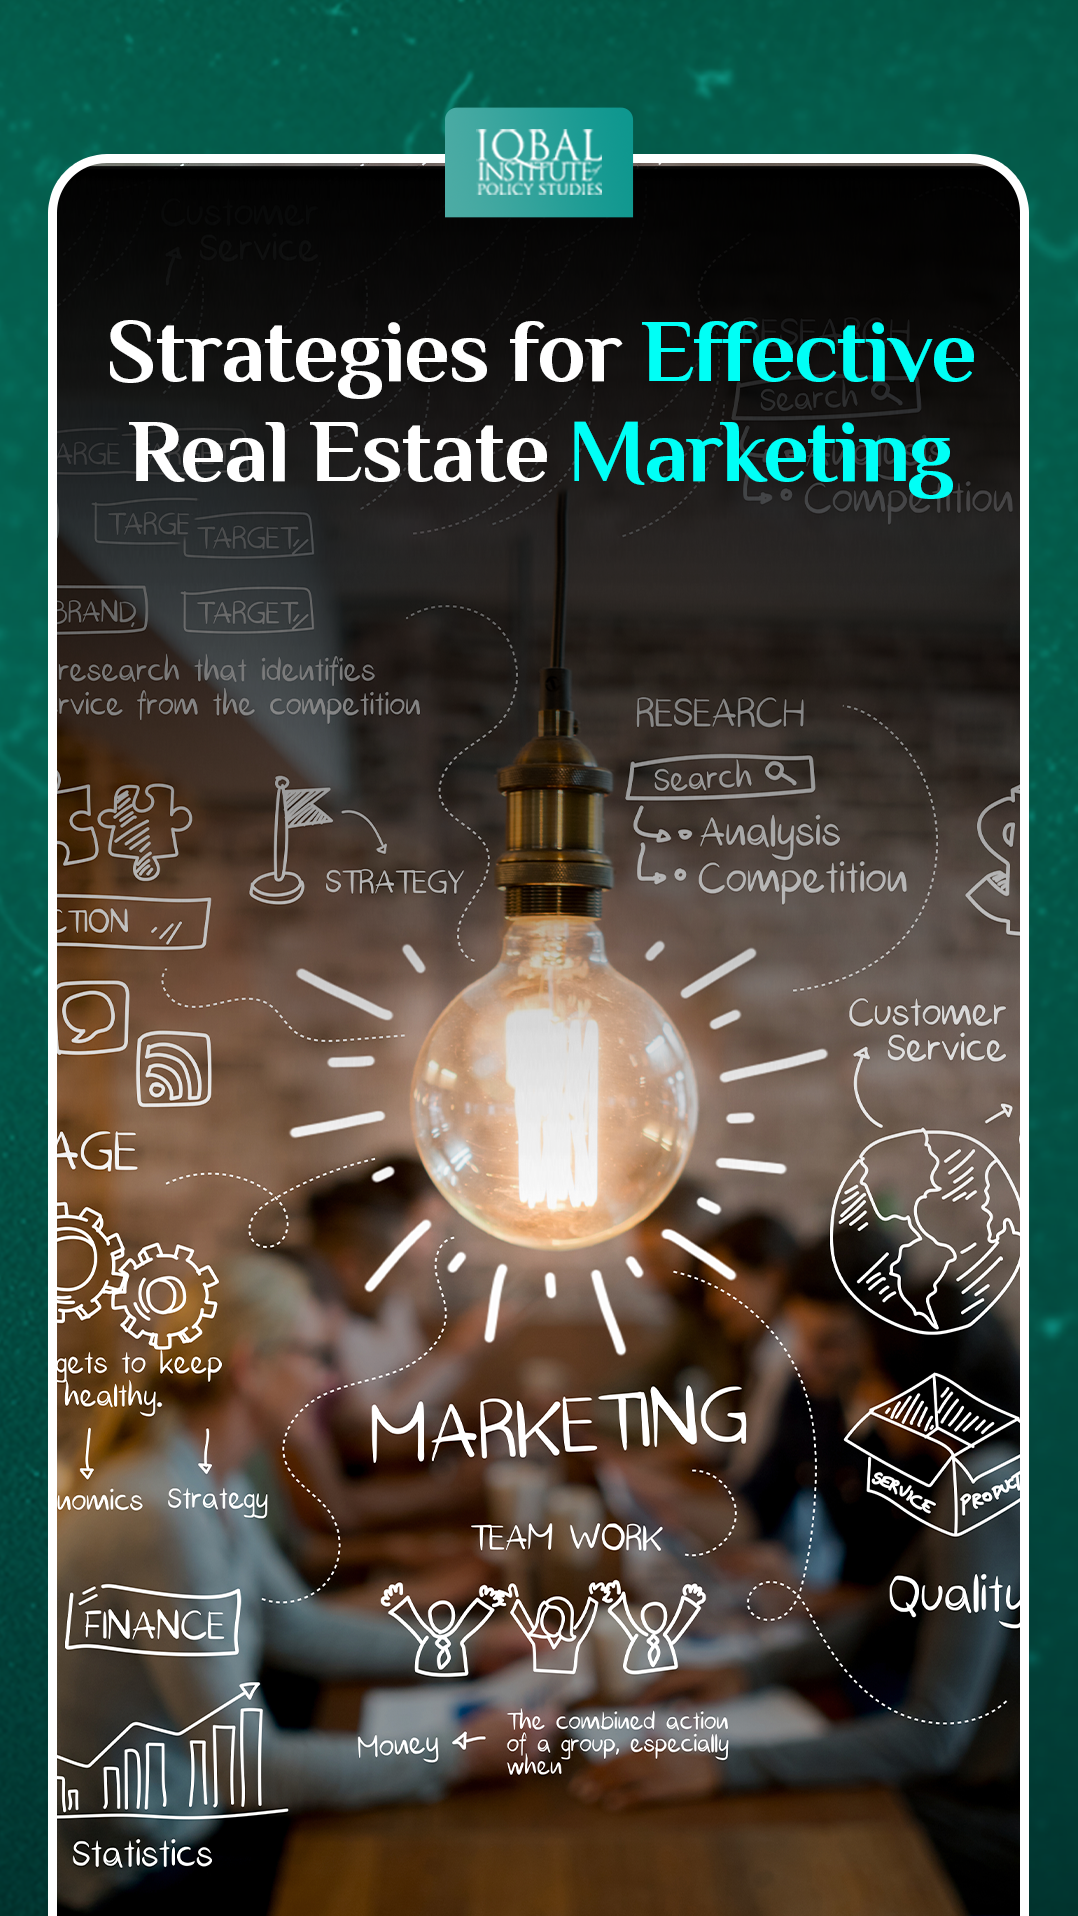 Strategies for Effective Real Estate Marketing